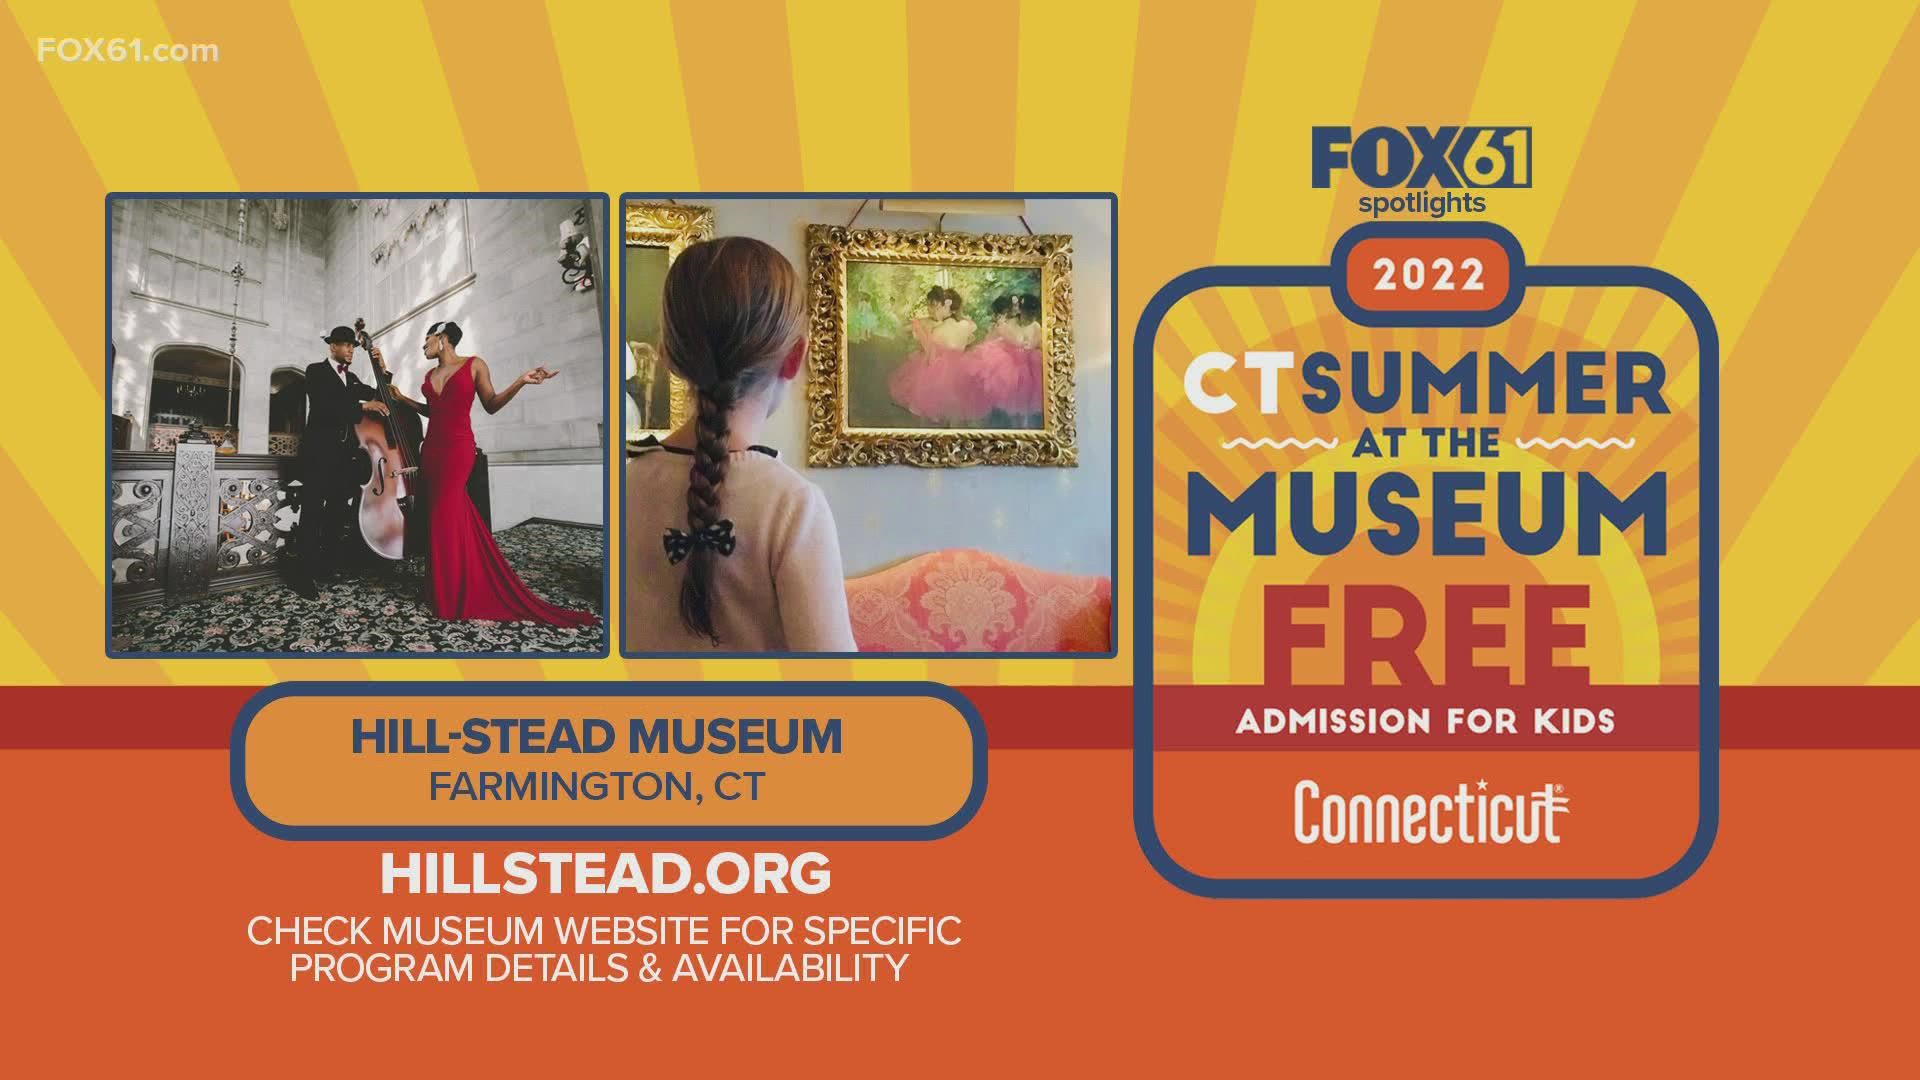 Kids 18 and under can visit the Hill-Stead Museum in Farmington for free with an adult who is a resident of Connecticut. It runs through Sept. 5.